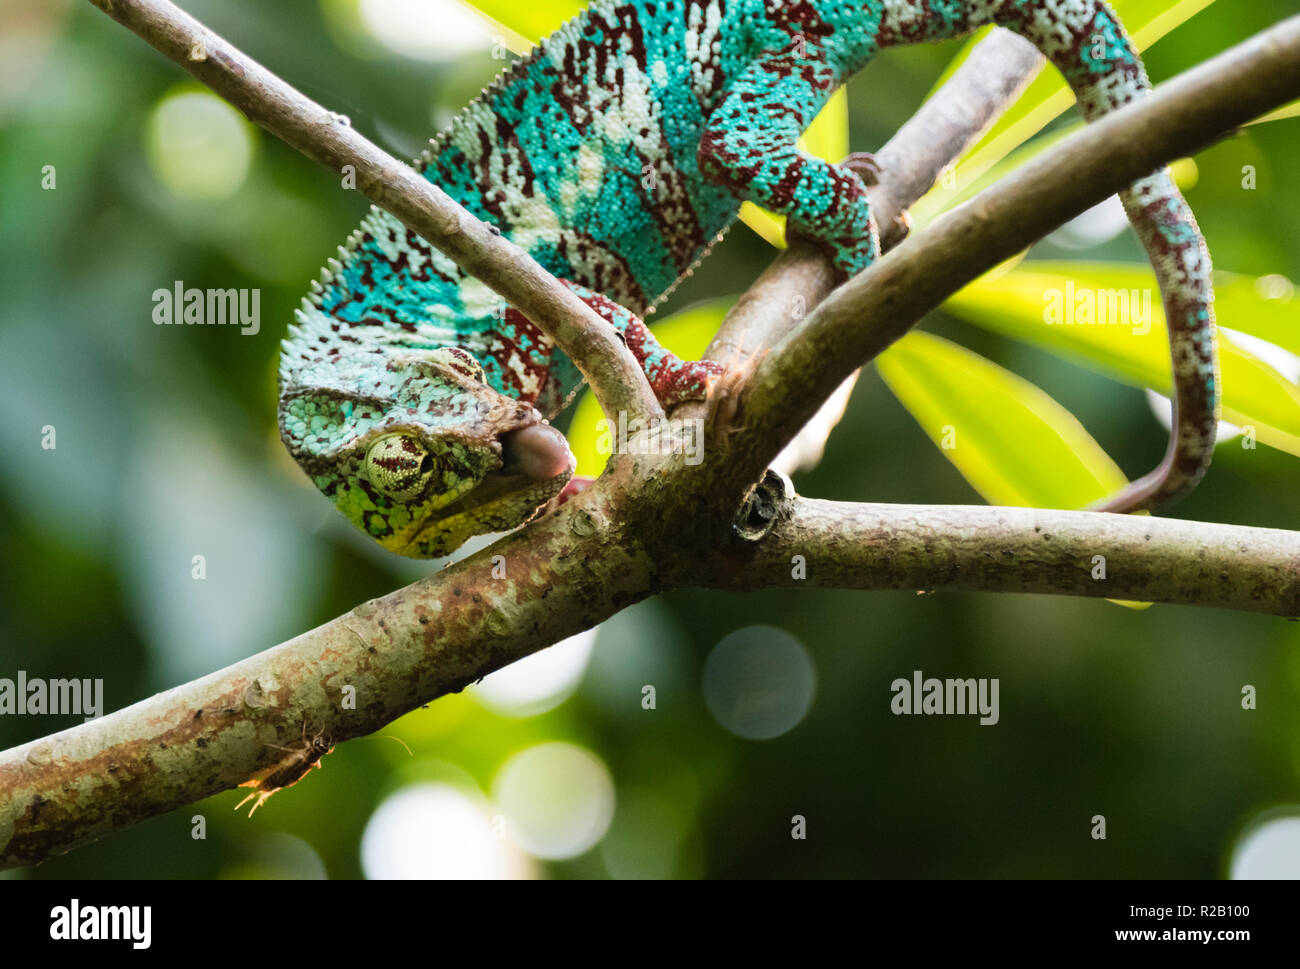 Male adult Panther Chameleon (Furcifer pardalis) in its natural habitat, the Madagascar rain forest, hunting an insect with its long sticky tongue. Stock Photo